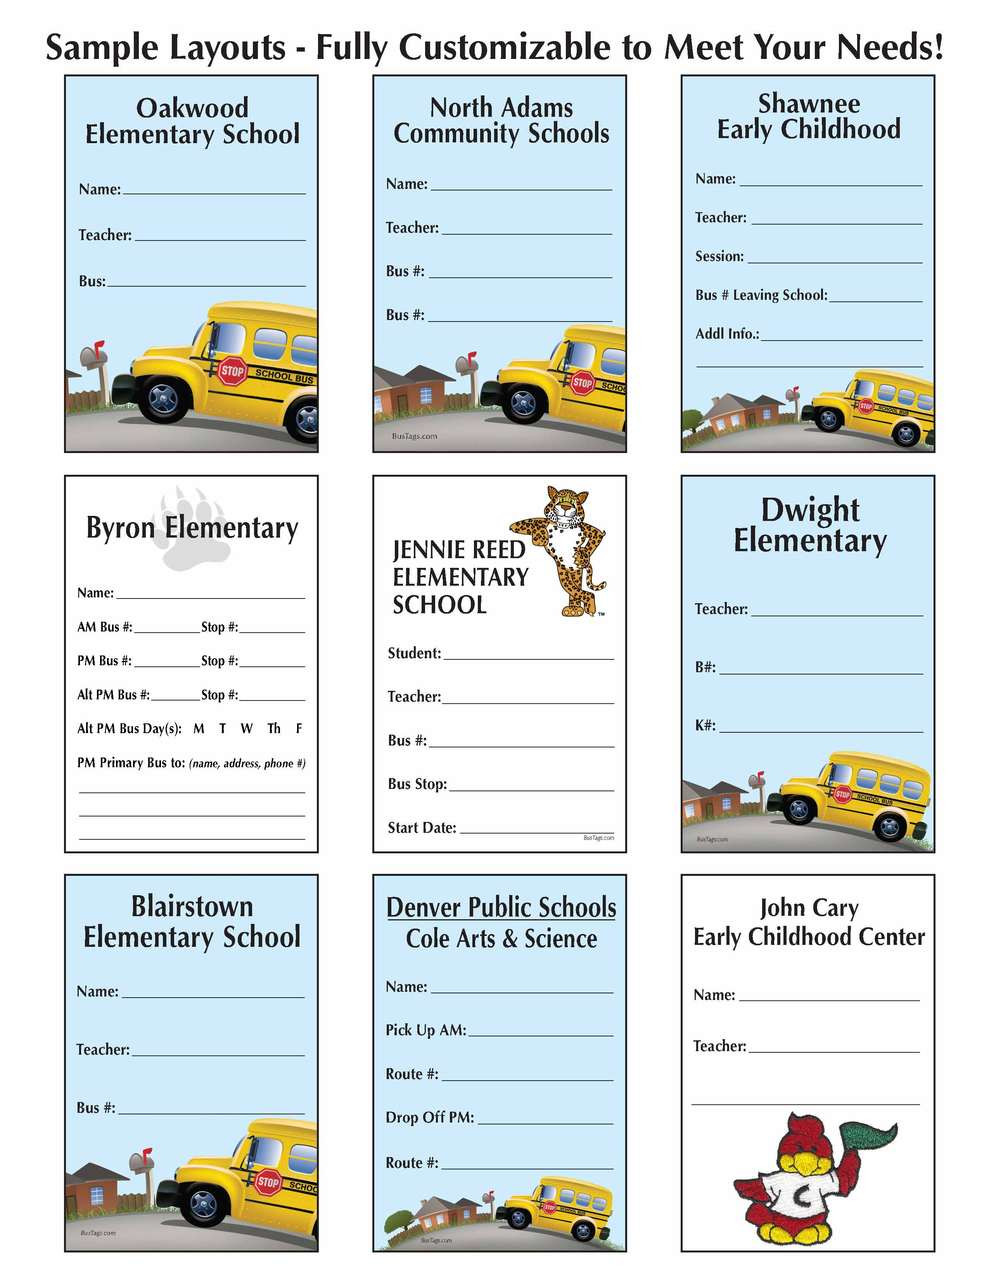 bus-tag-student-id-tags-custom-layout-nationalschoolforms